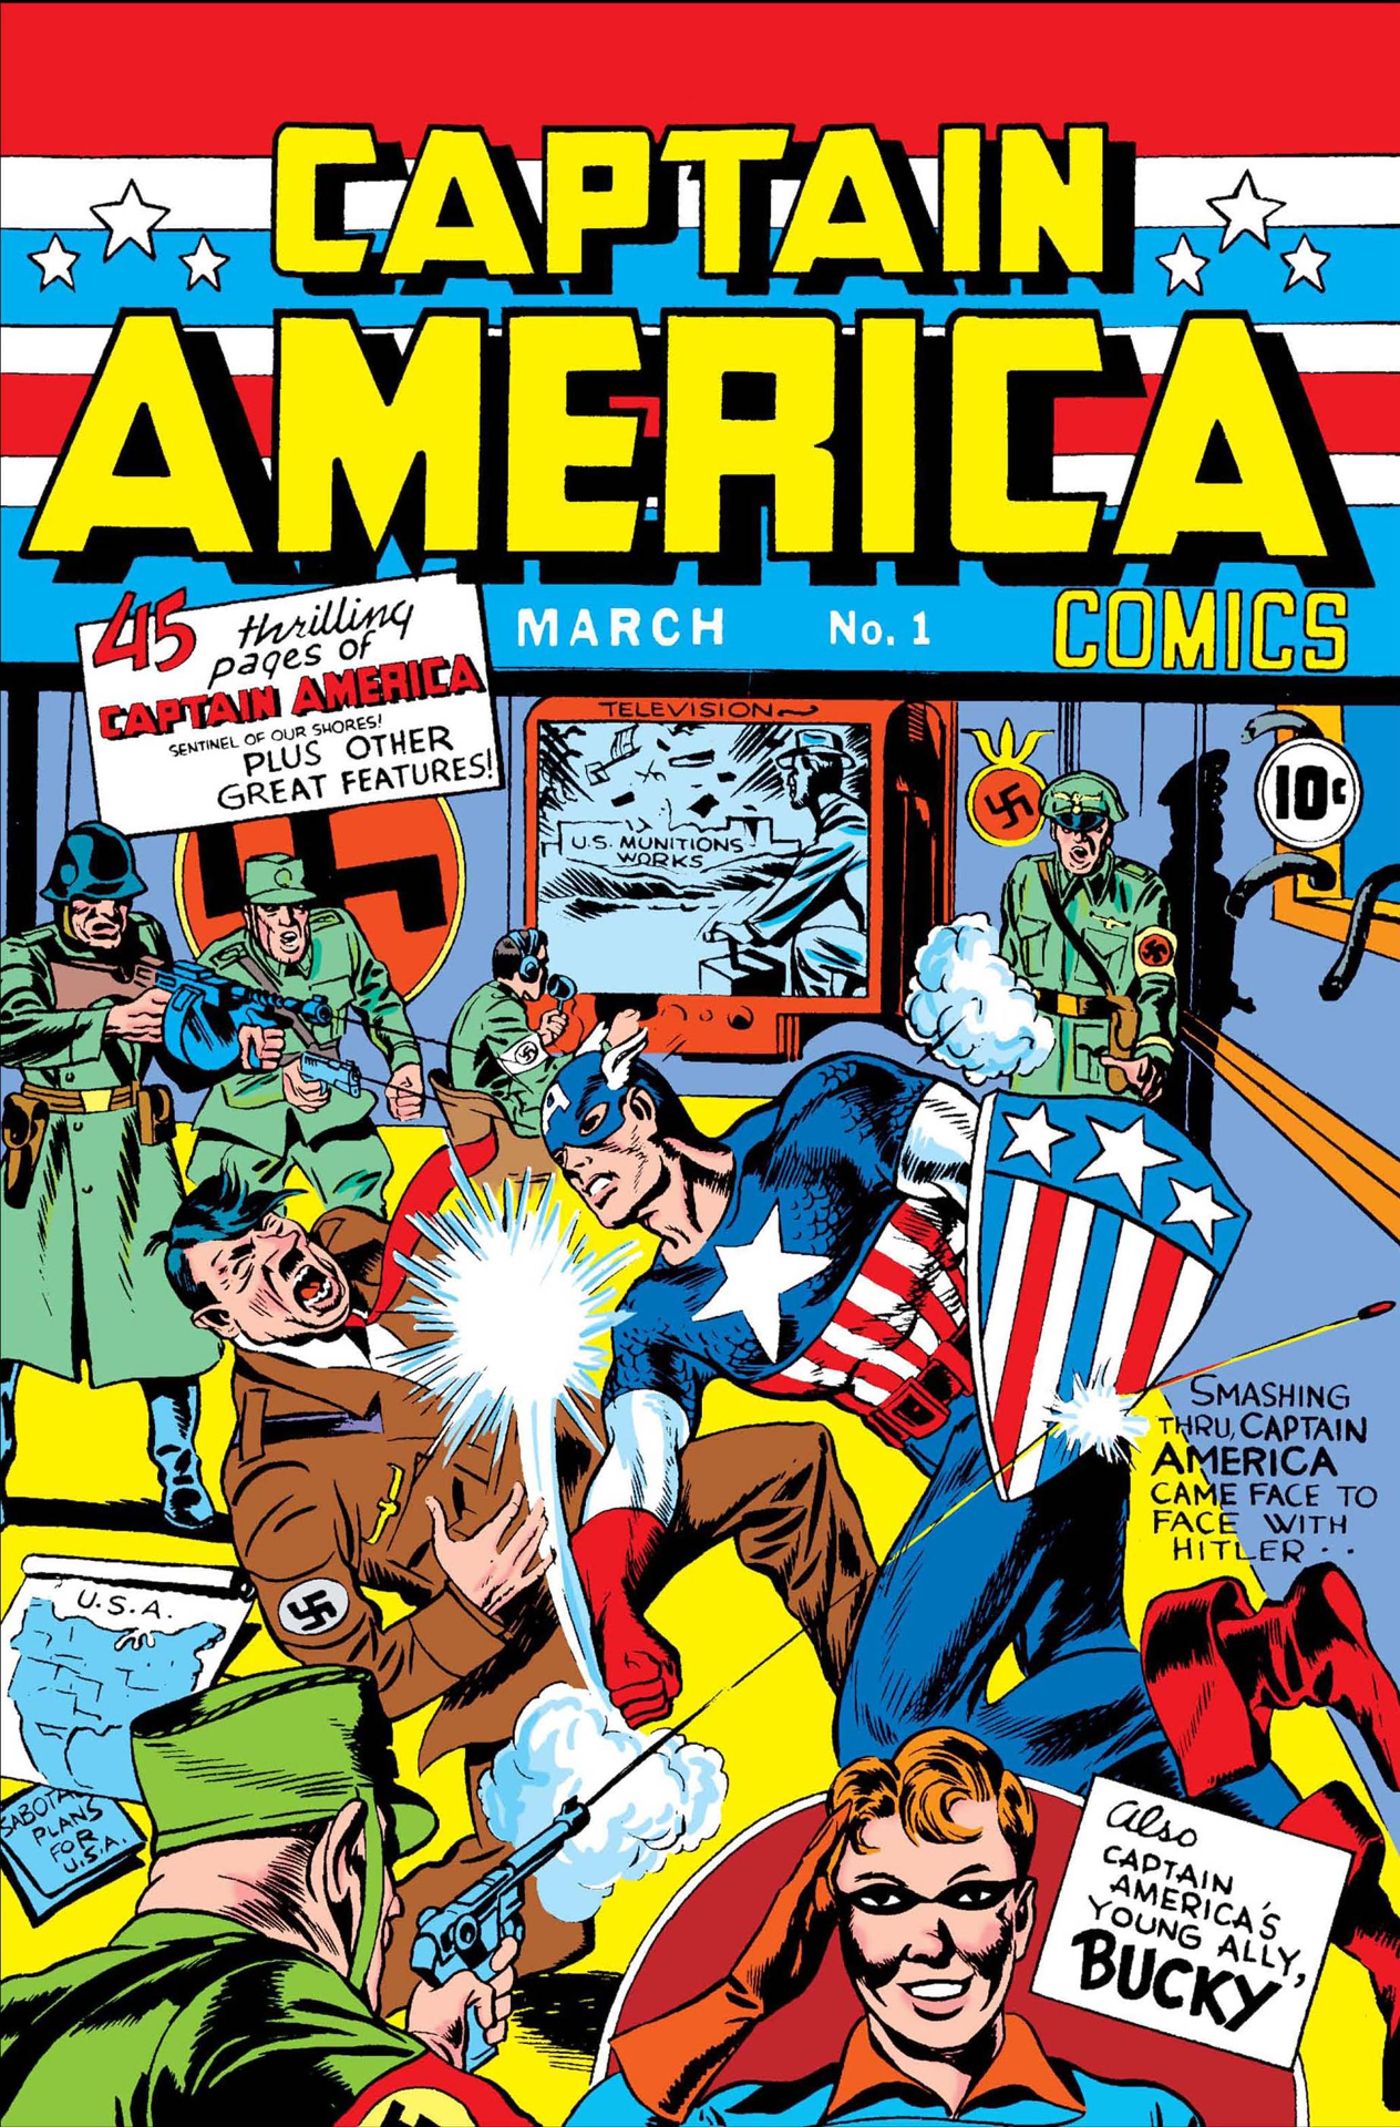 The First Issue of Captain America